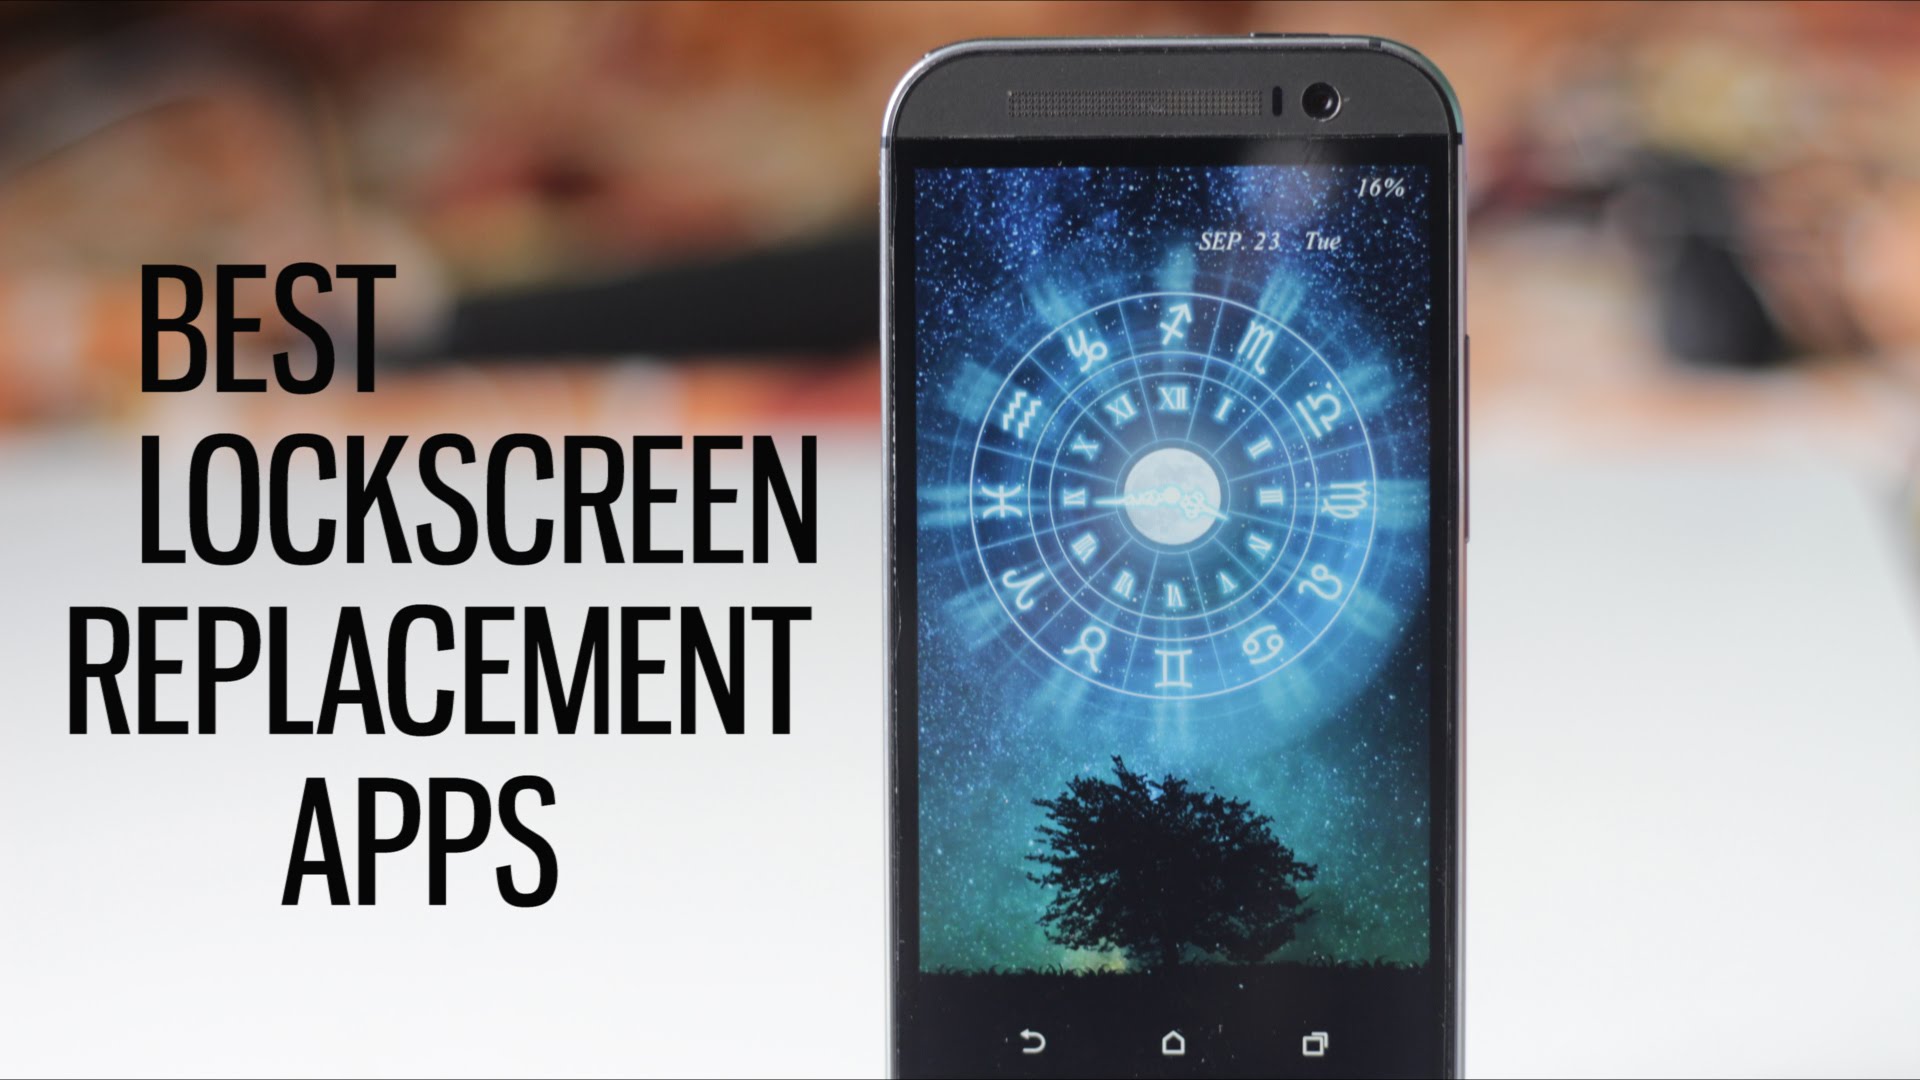 Top 5 Best Lockscreen Replacement Apps 2014 - Customize Your